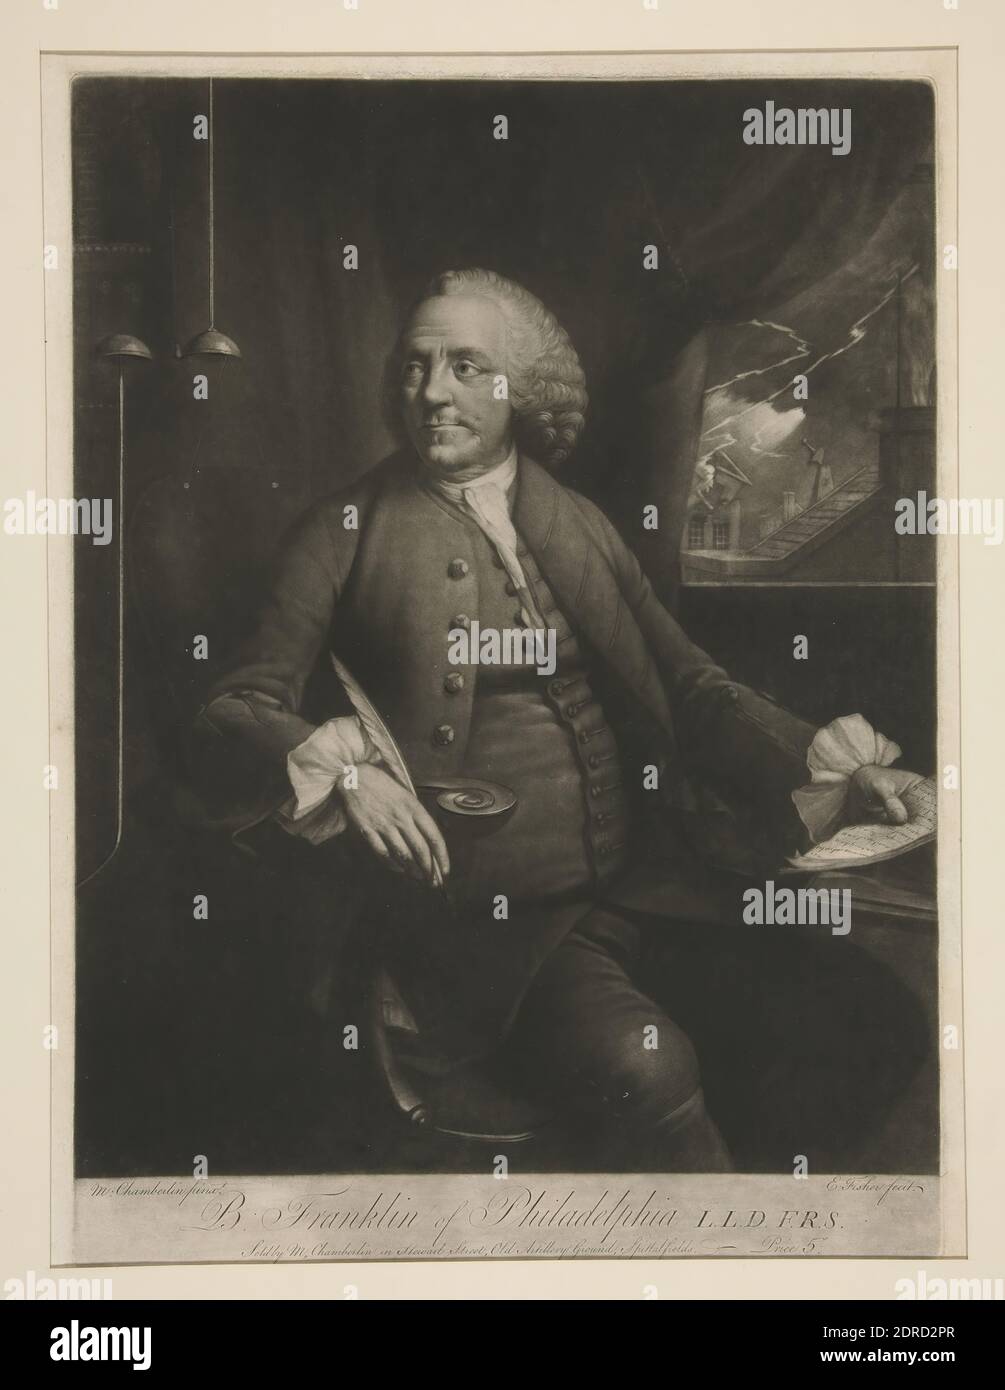 Artist: Edward Fisher, Irish, 1730–after 1781, After: Mason Chamberlin, British, 1727–1787, B. Franklin of Philadelphia, L.L.D., F.R.S., Mezzotint engraving, black and white, second state of three (original issue), sheet: 40 × 30 cm (15 3/4 × 11 13/16 in.), Made in United States, American, 18th century, Works on Paper - Prints Stock Photo